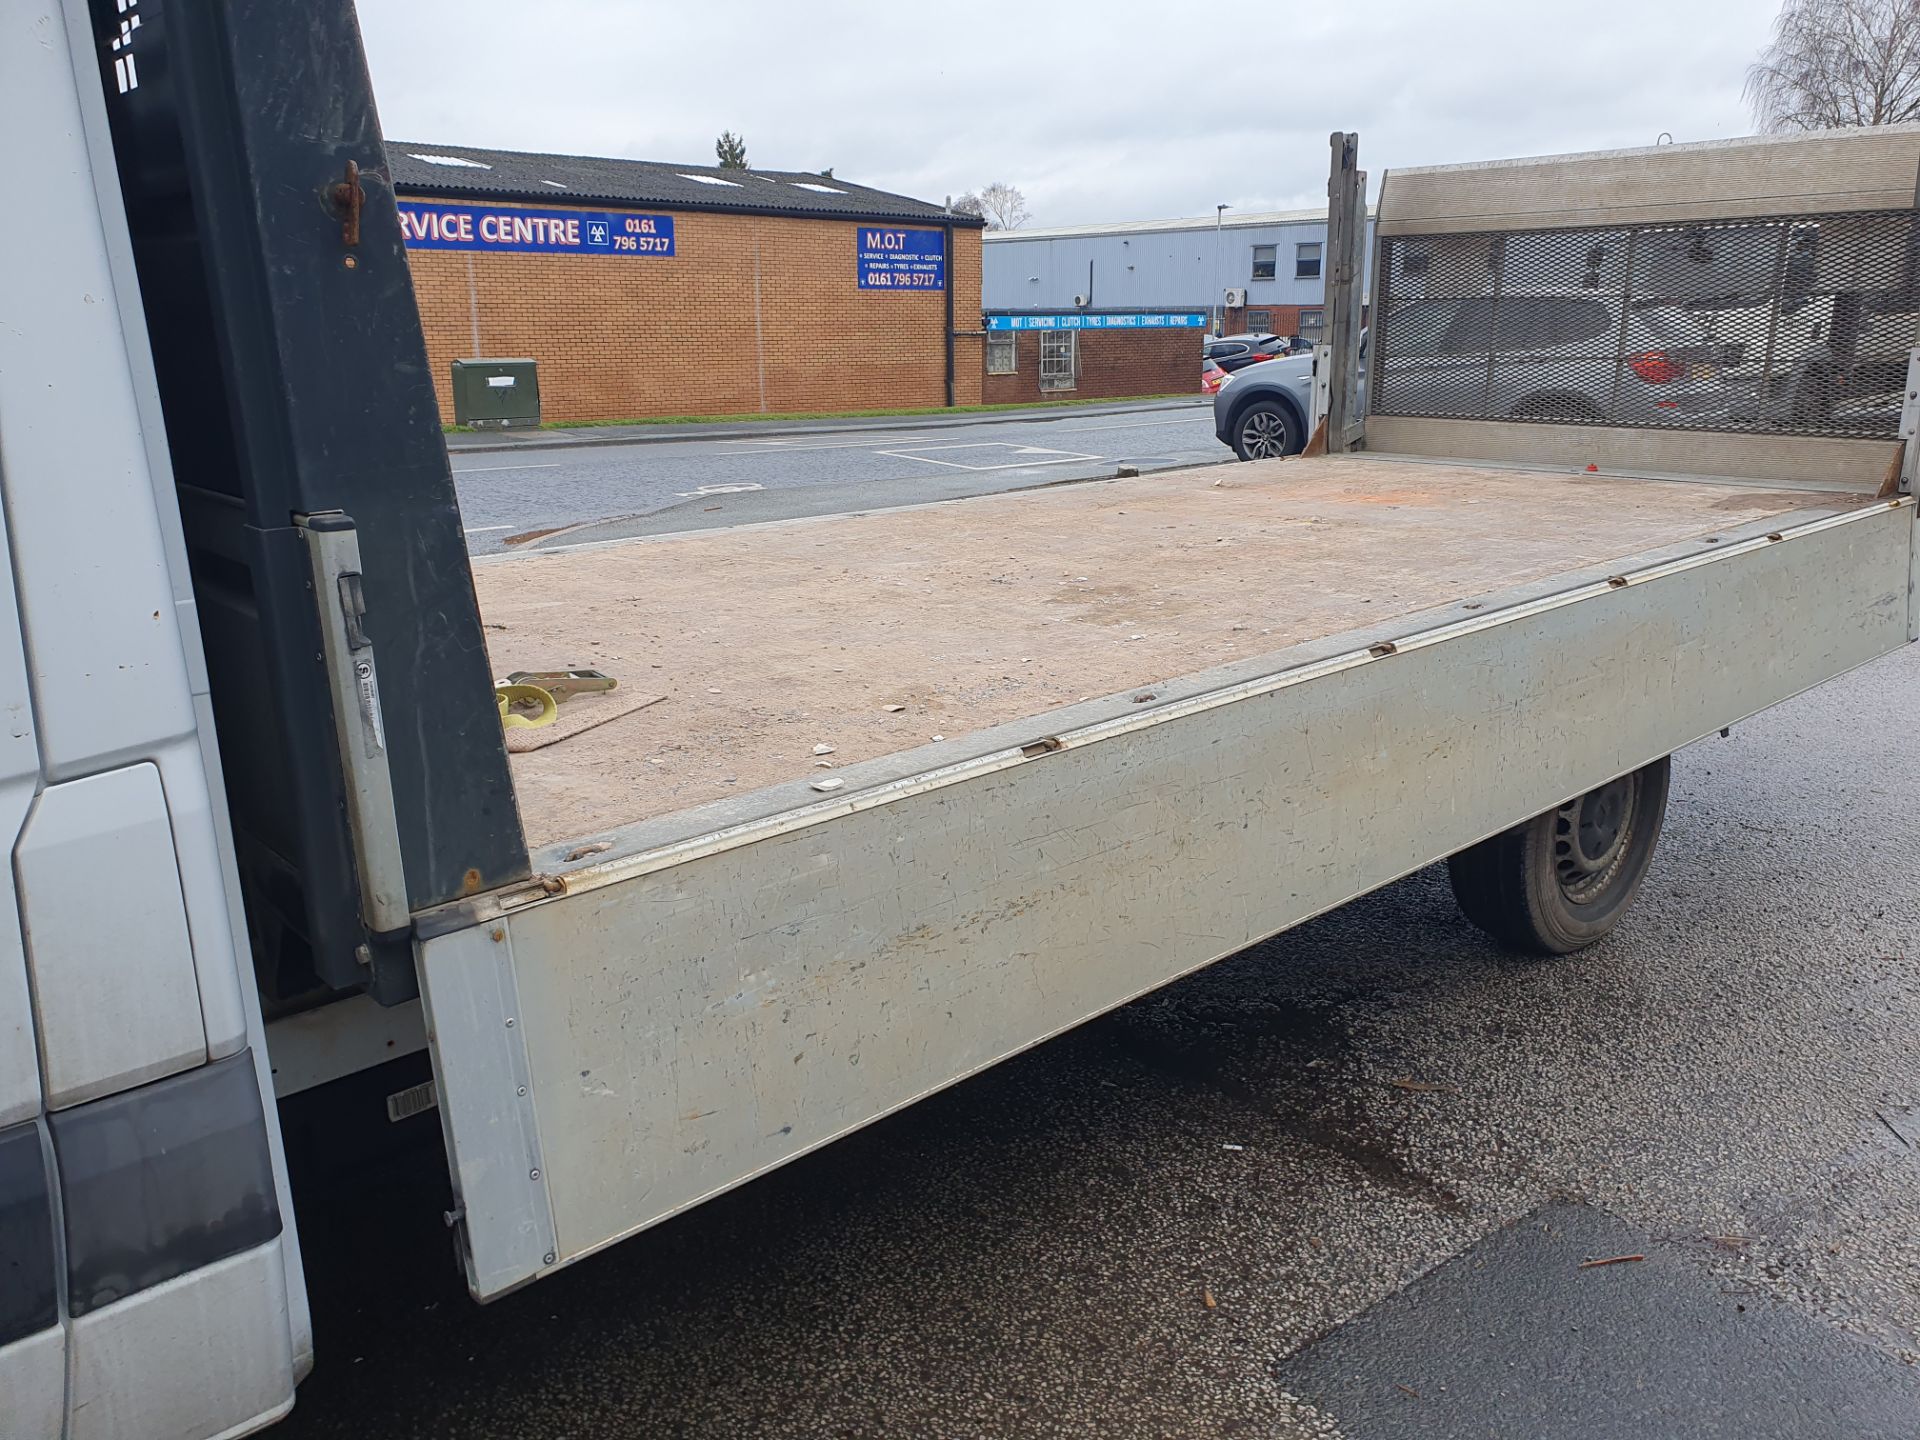 Mercedes-Benz Sprinter 314CDI Dropside Lorry w/ Tail-Lift | DIG 4985 | 102,887 Miles - Image 13 of 19